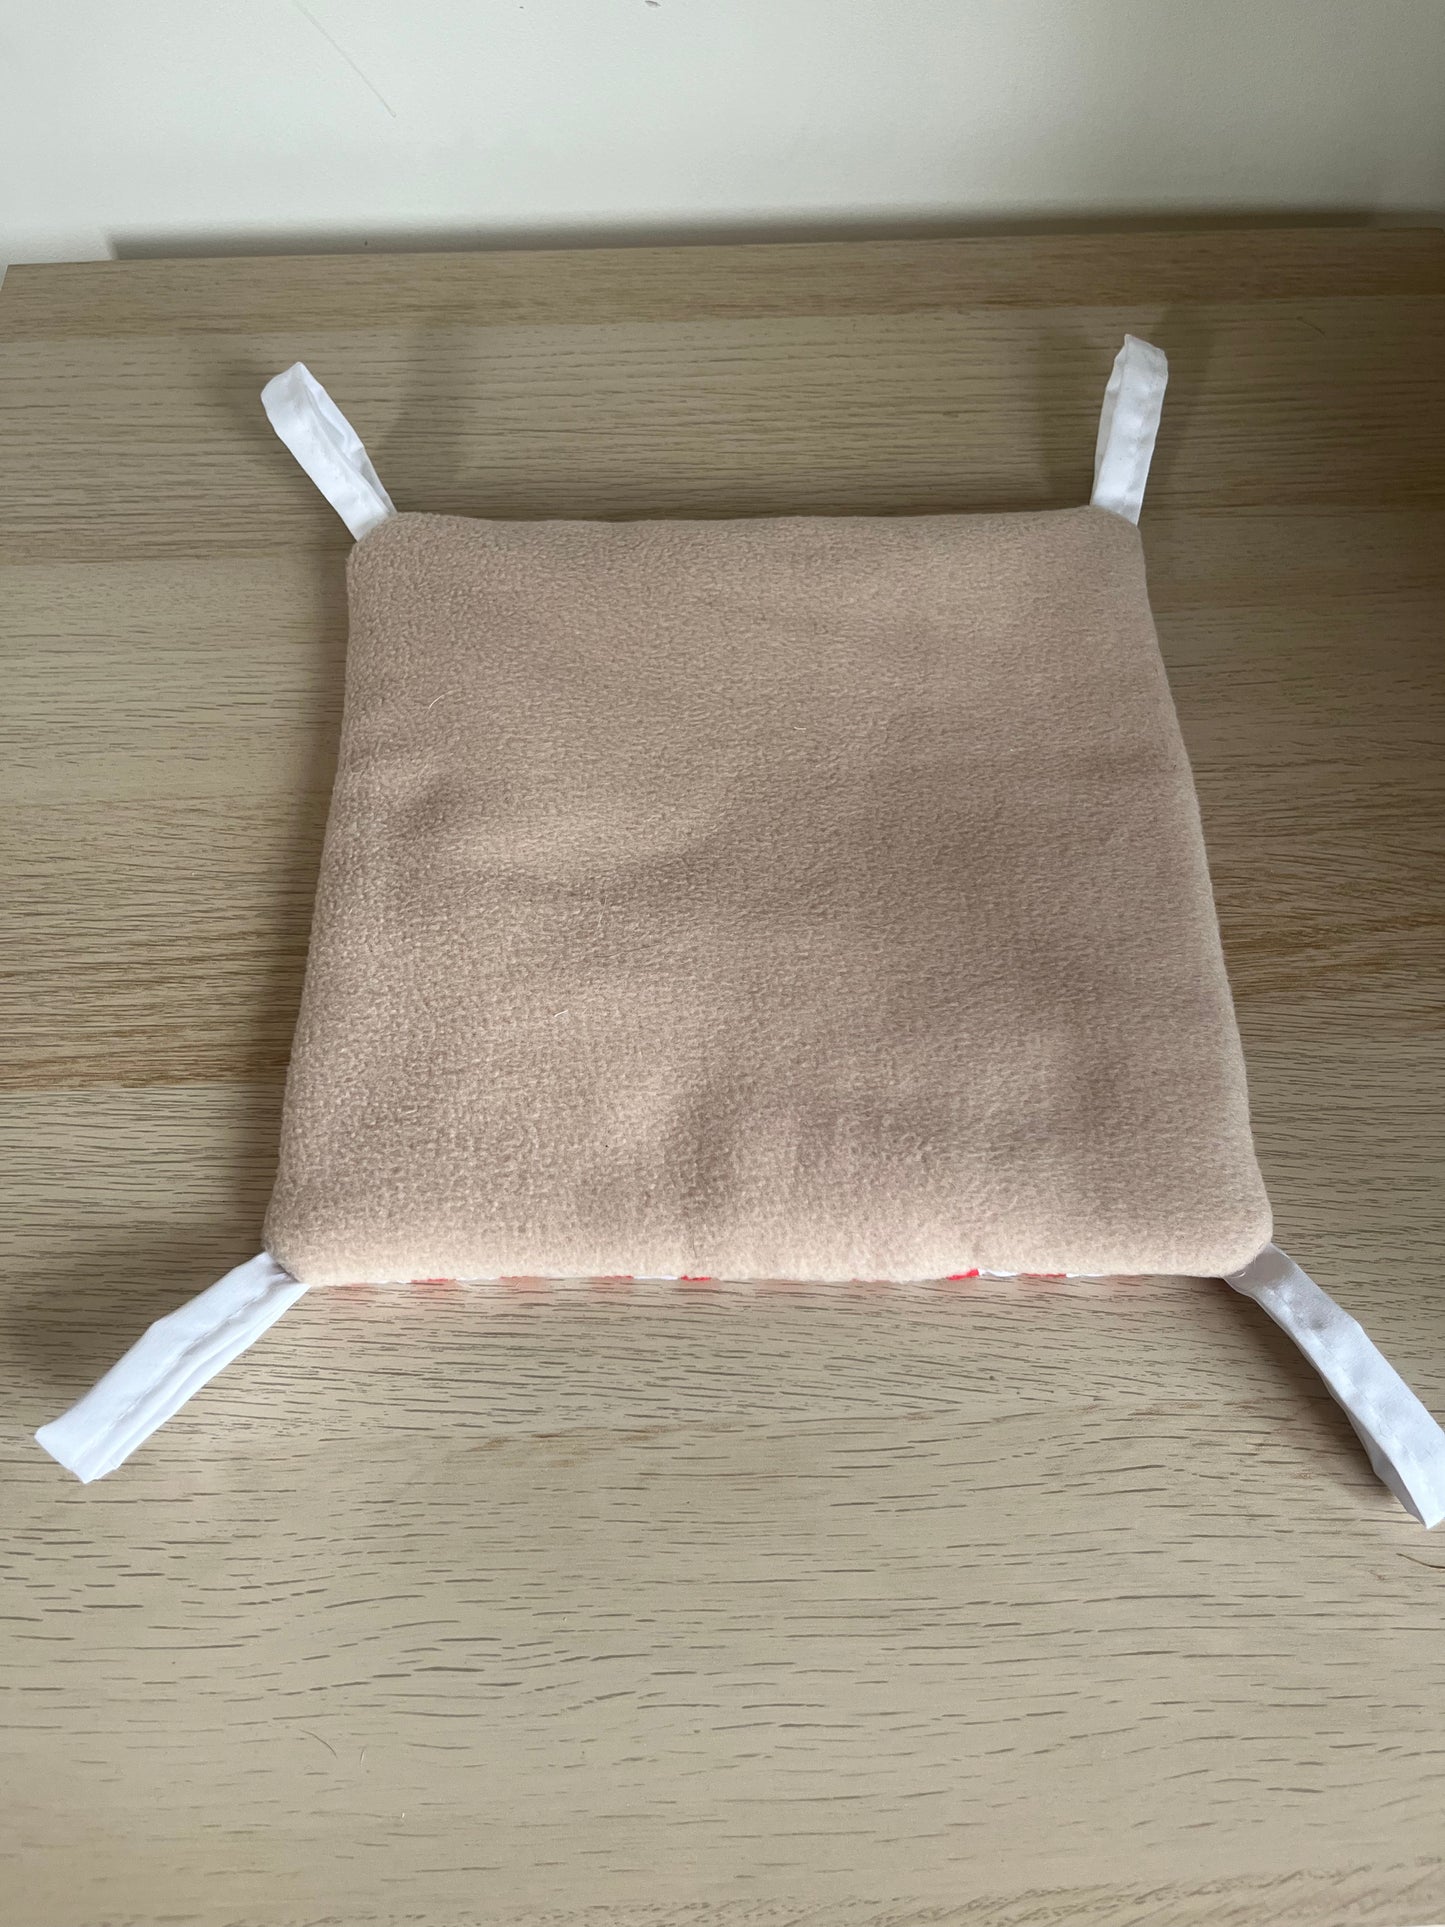 Hammock Stand Pads for Guinea Pigs